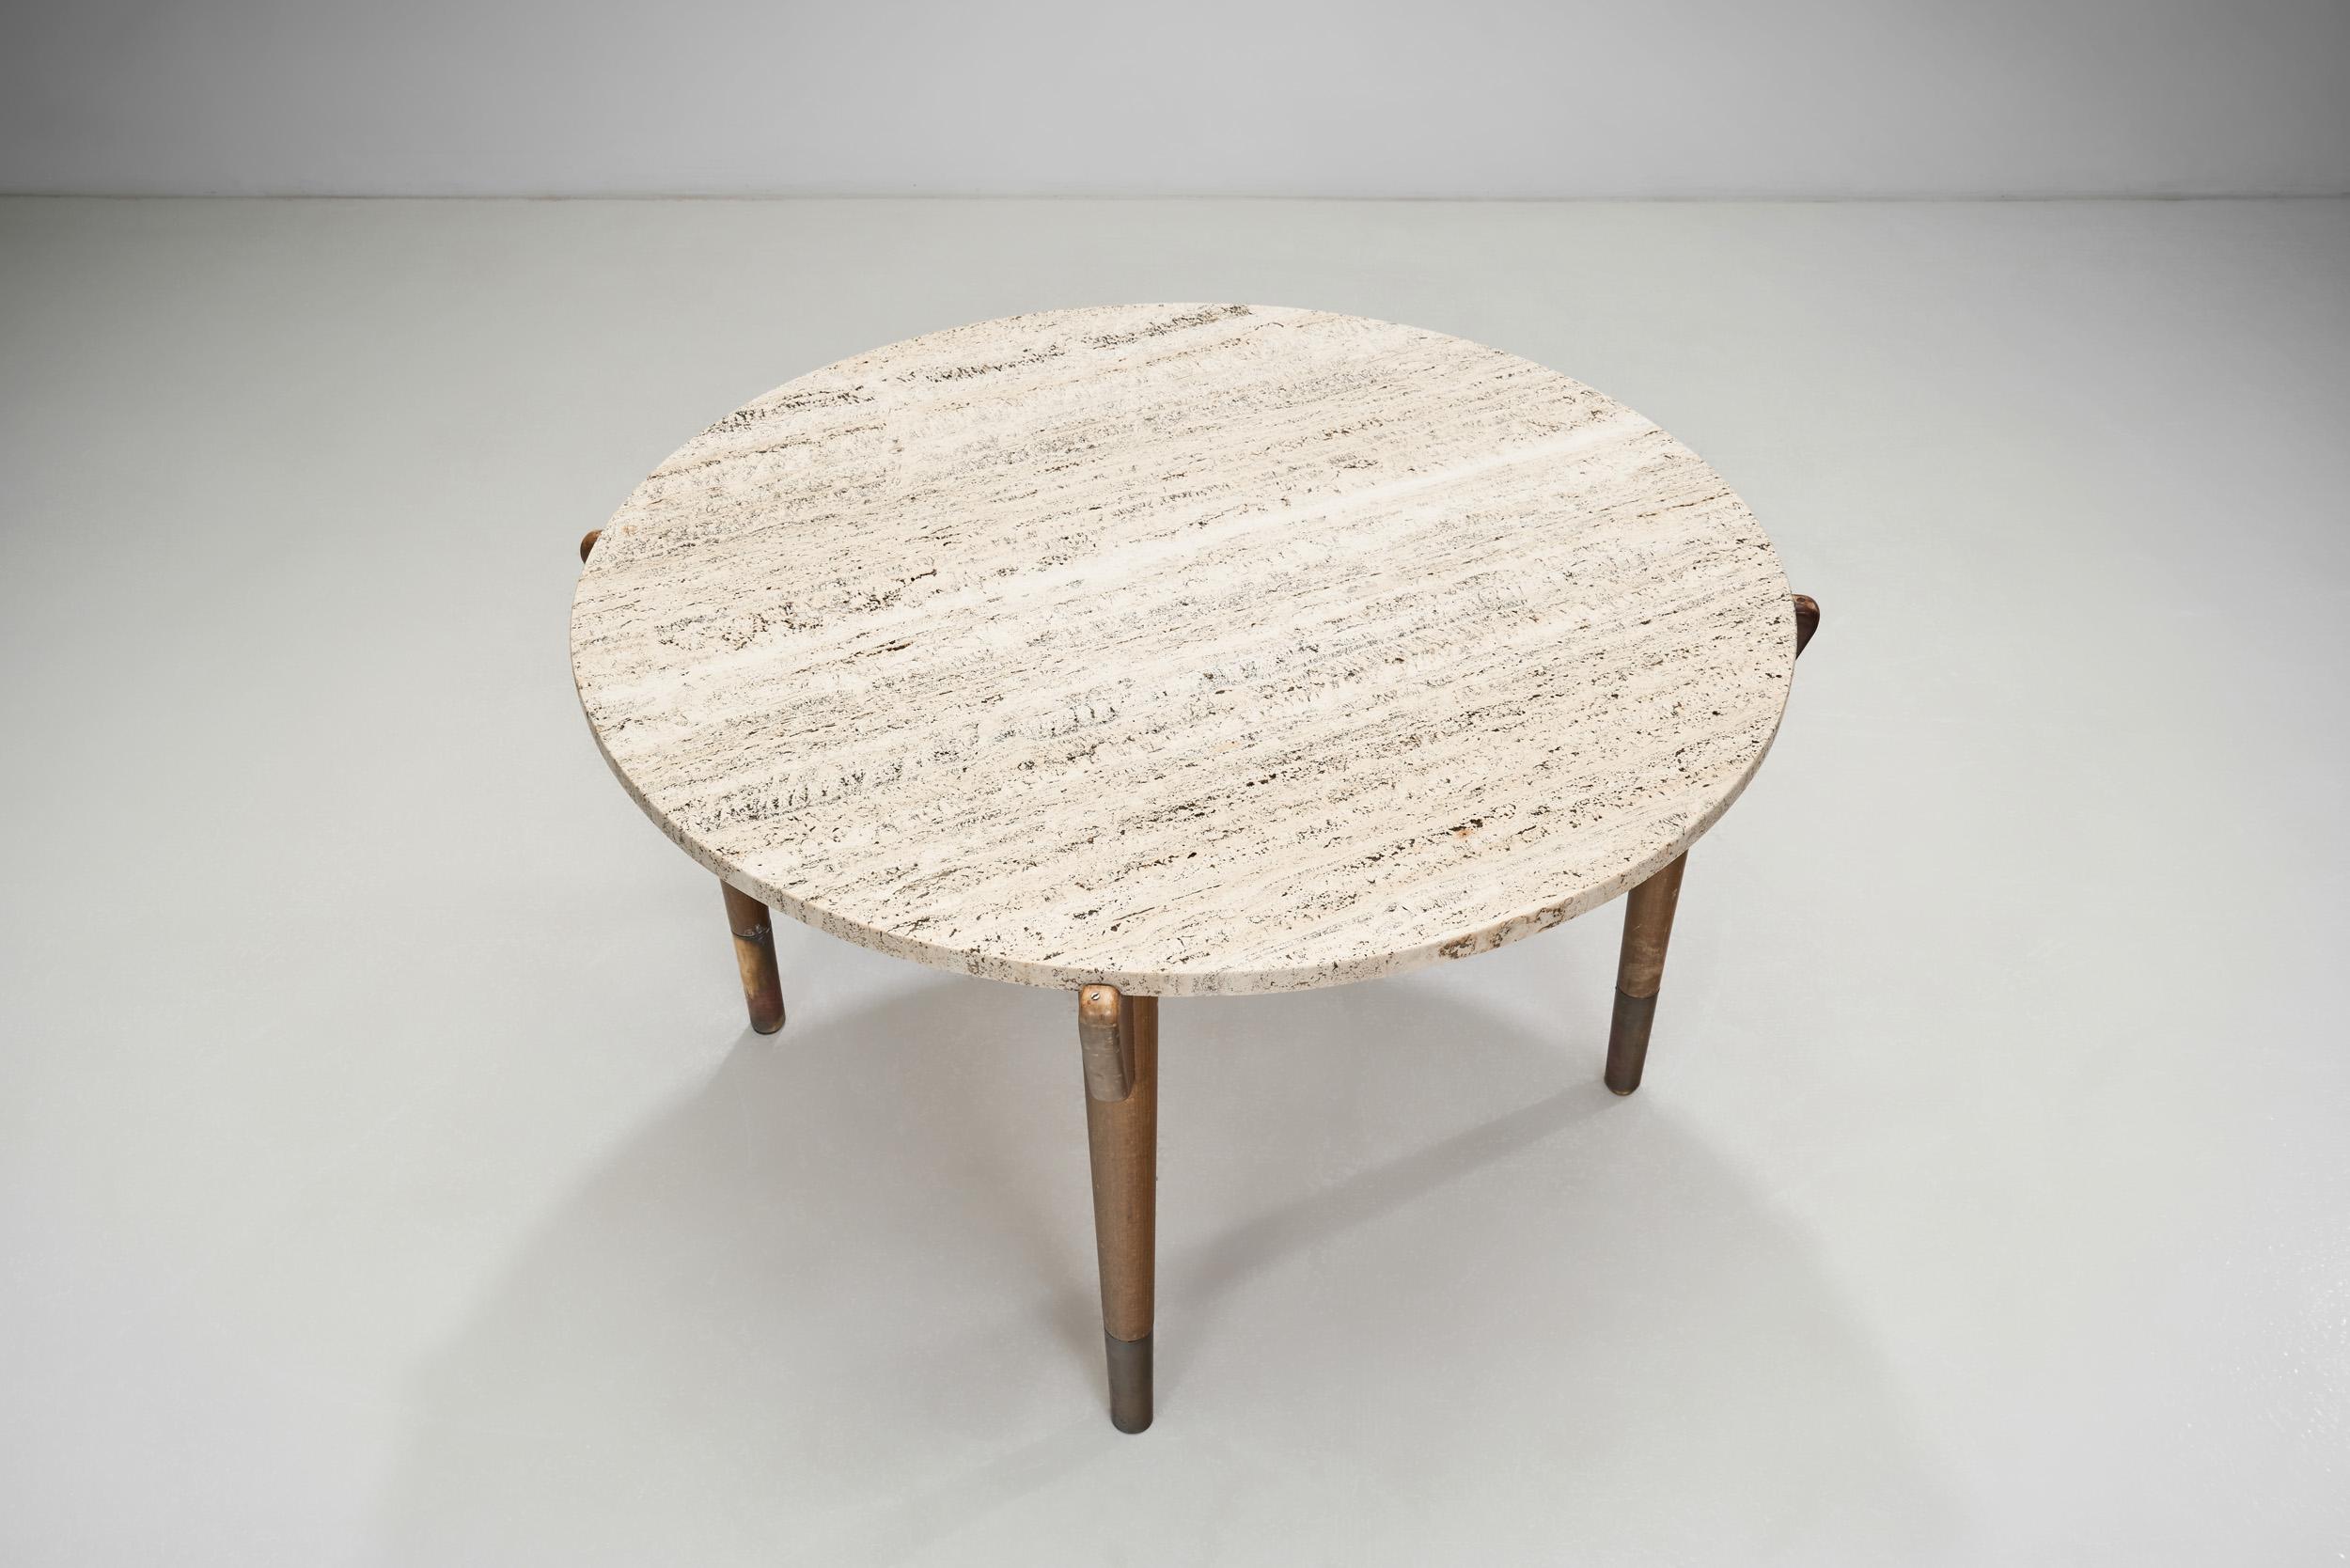 Swedish Modern Stained Beech Coffee Table with Travertine Top, Sweden 1940s For Sale 1